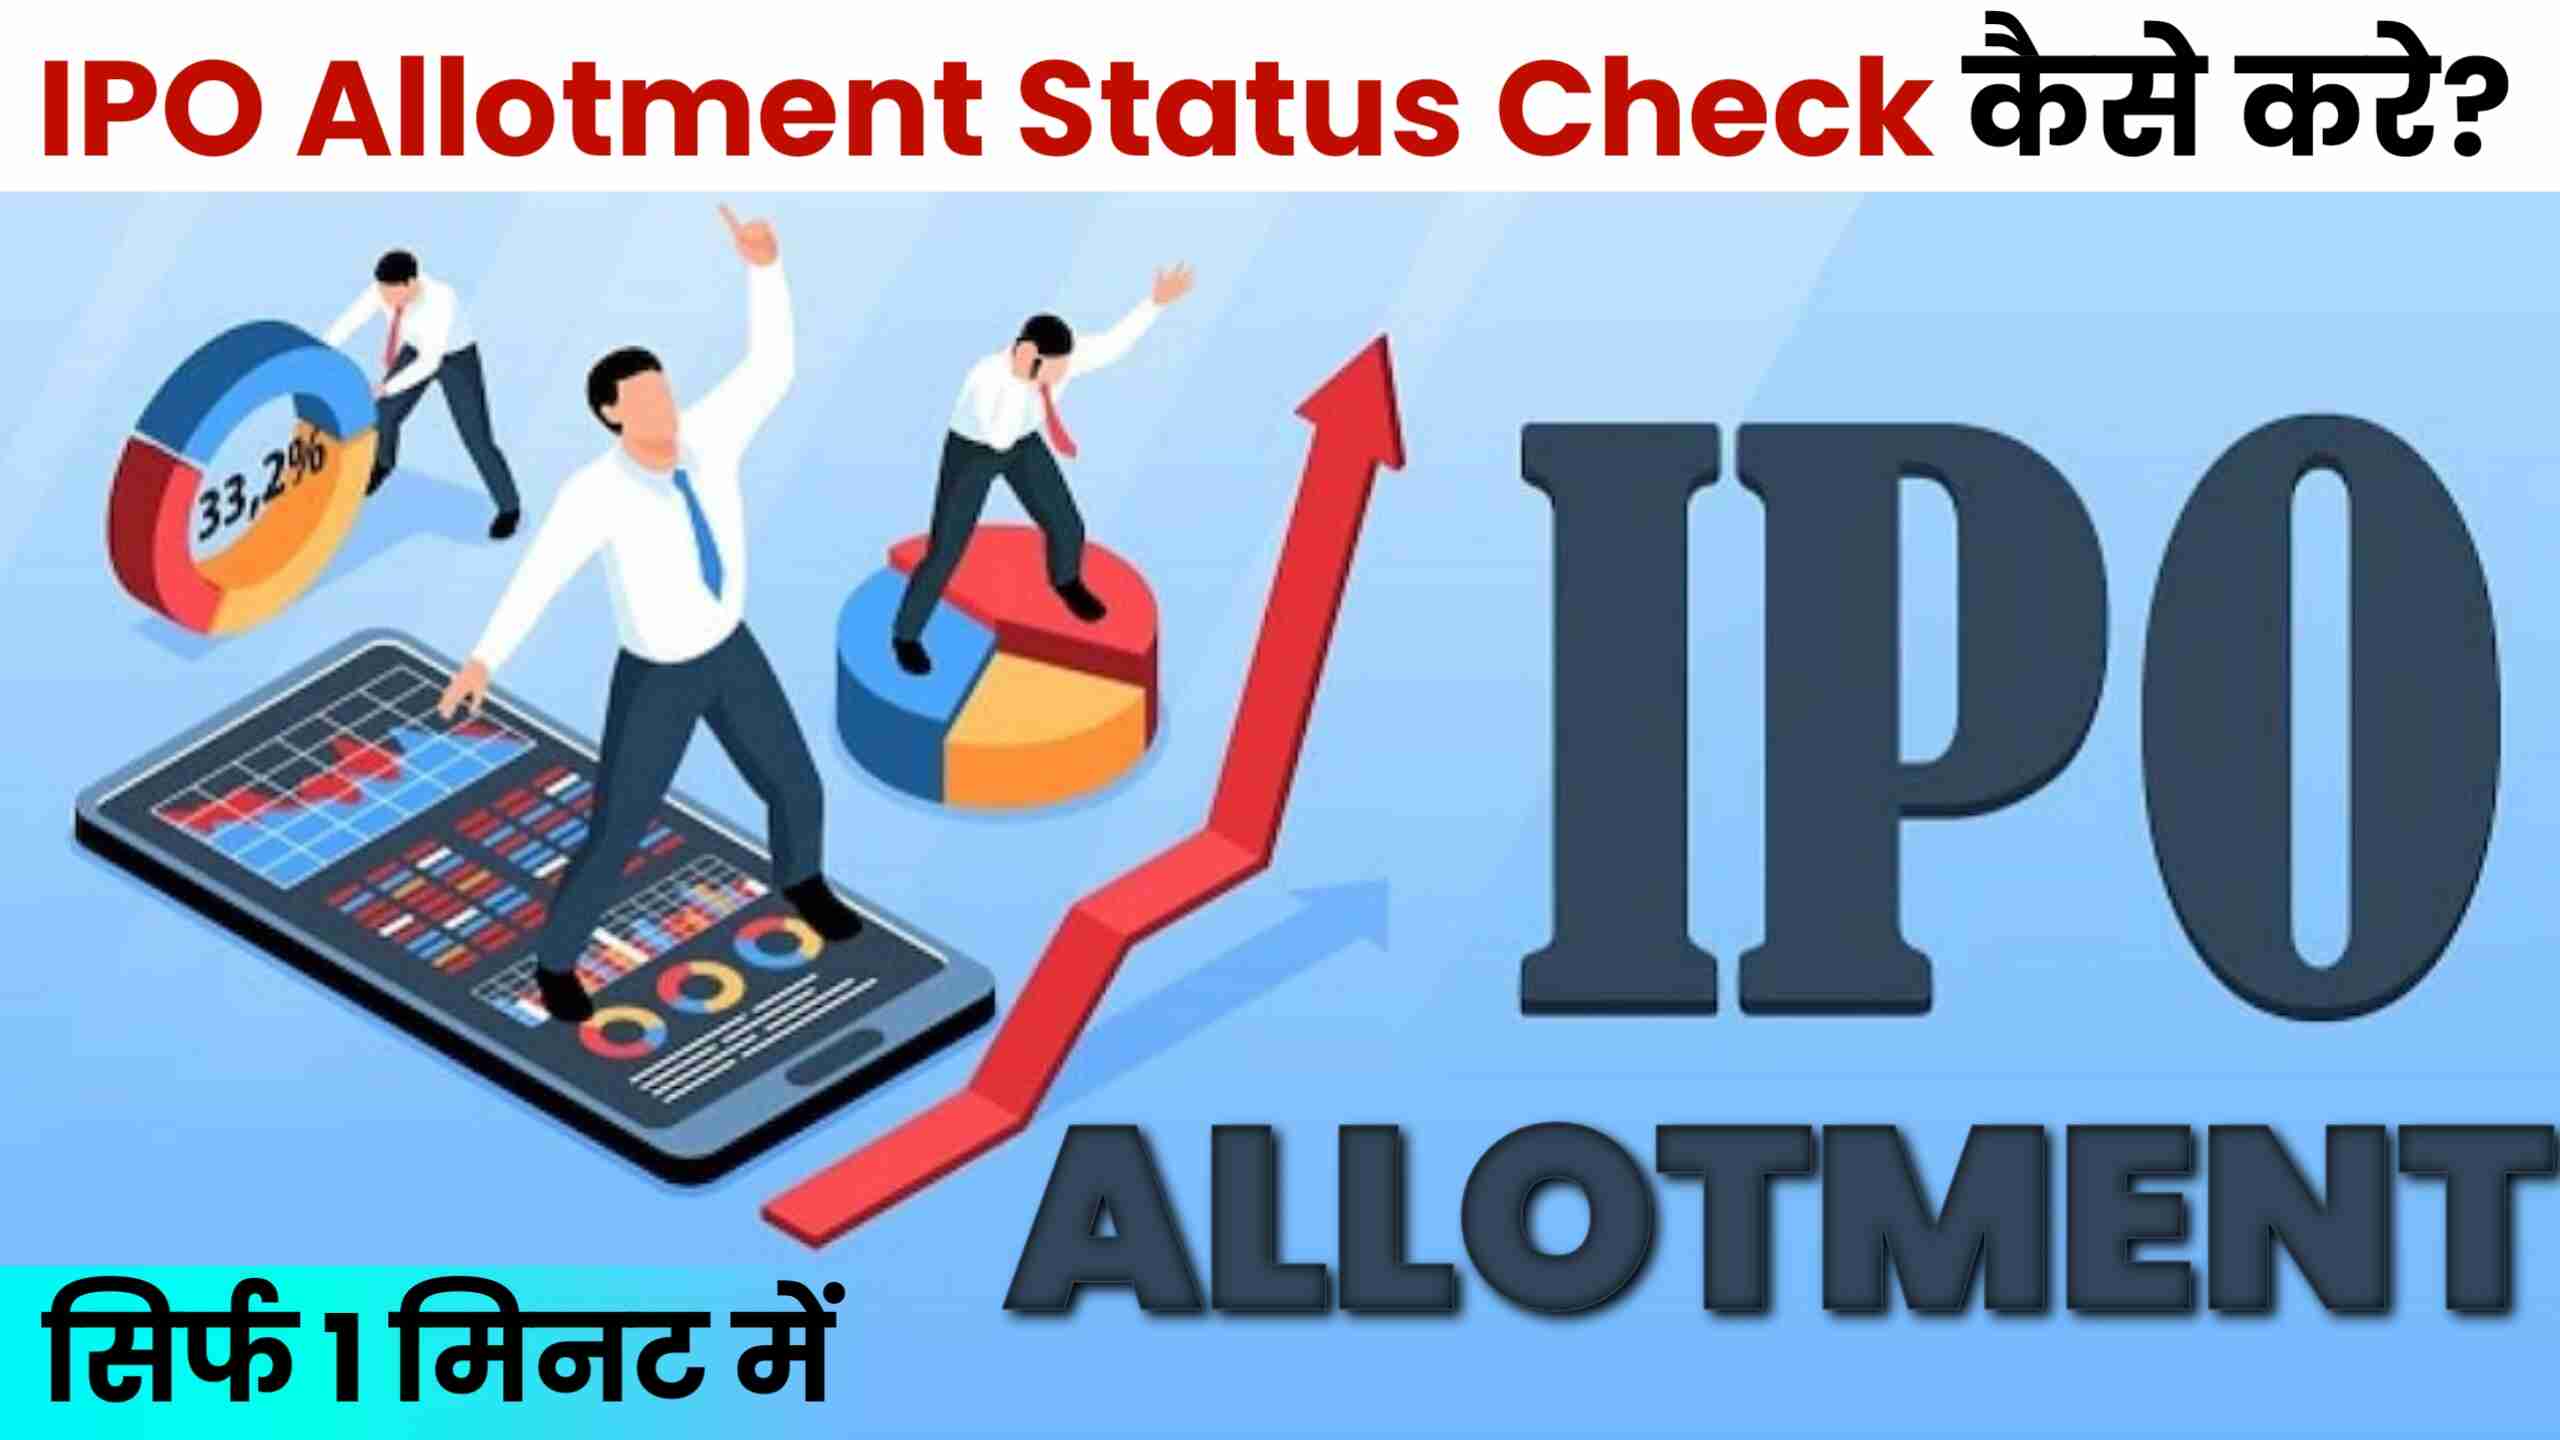 How to Check IPO Allotment Status